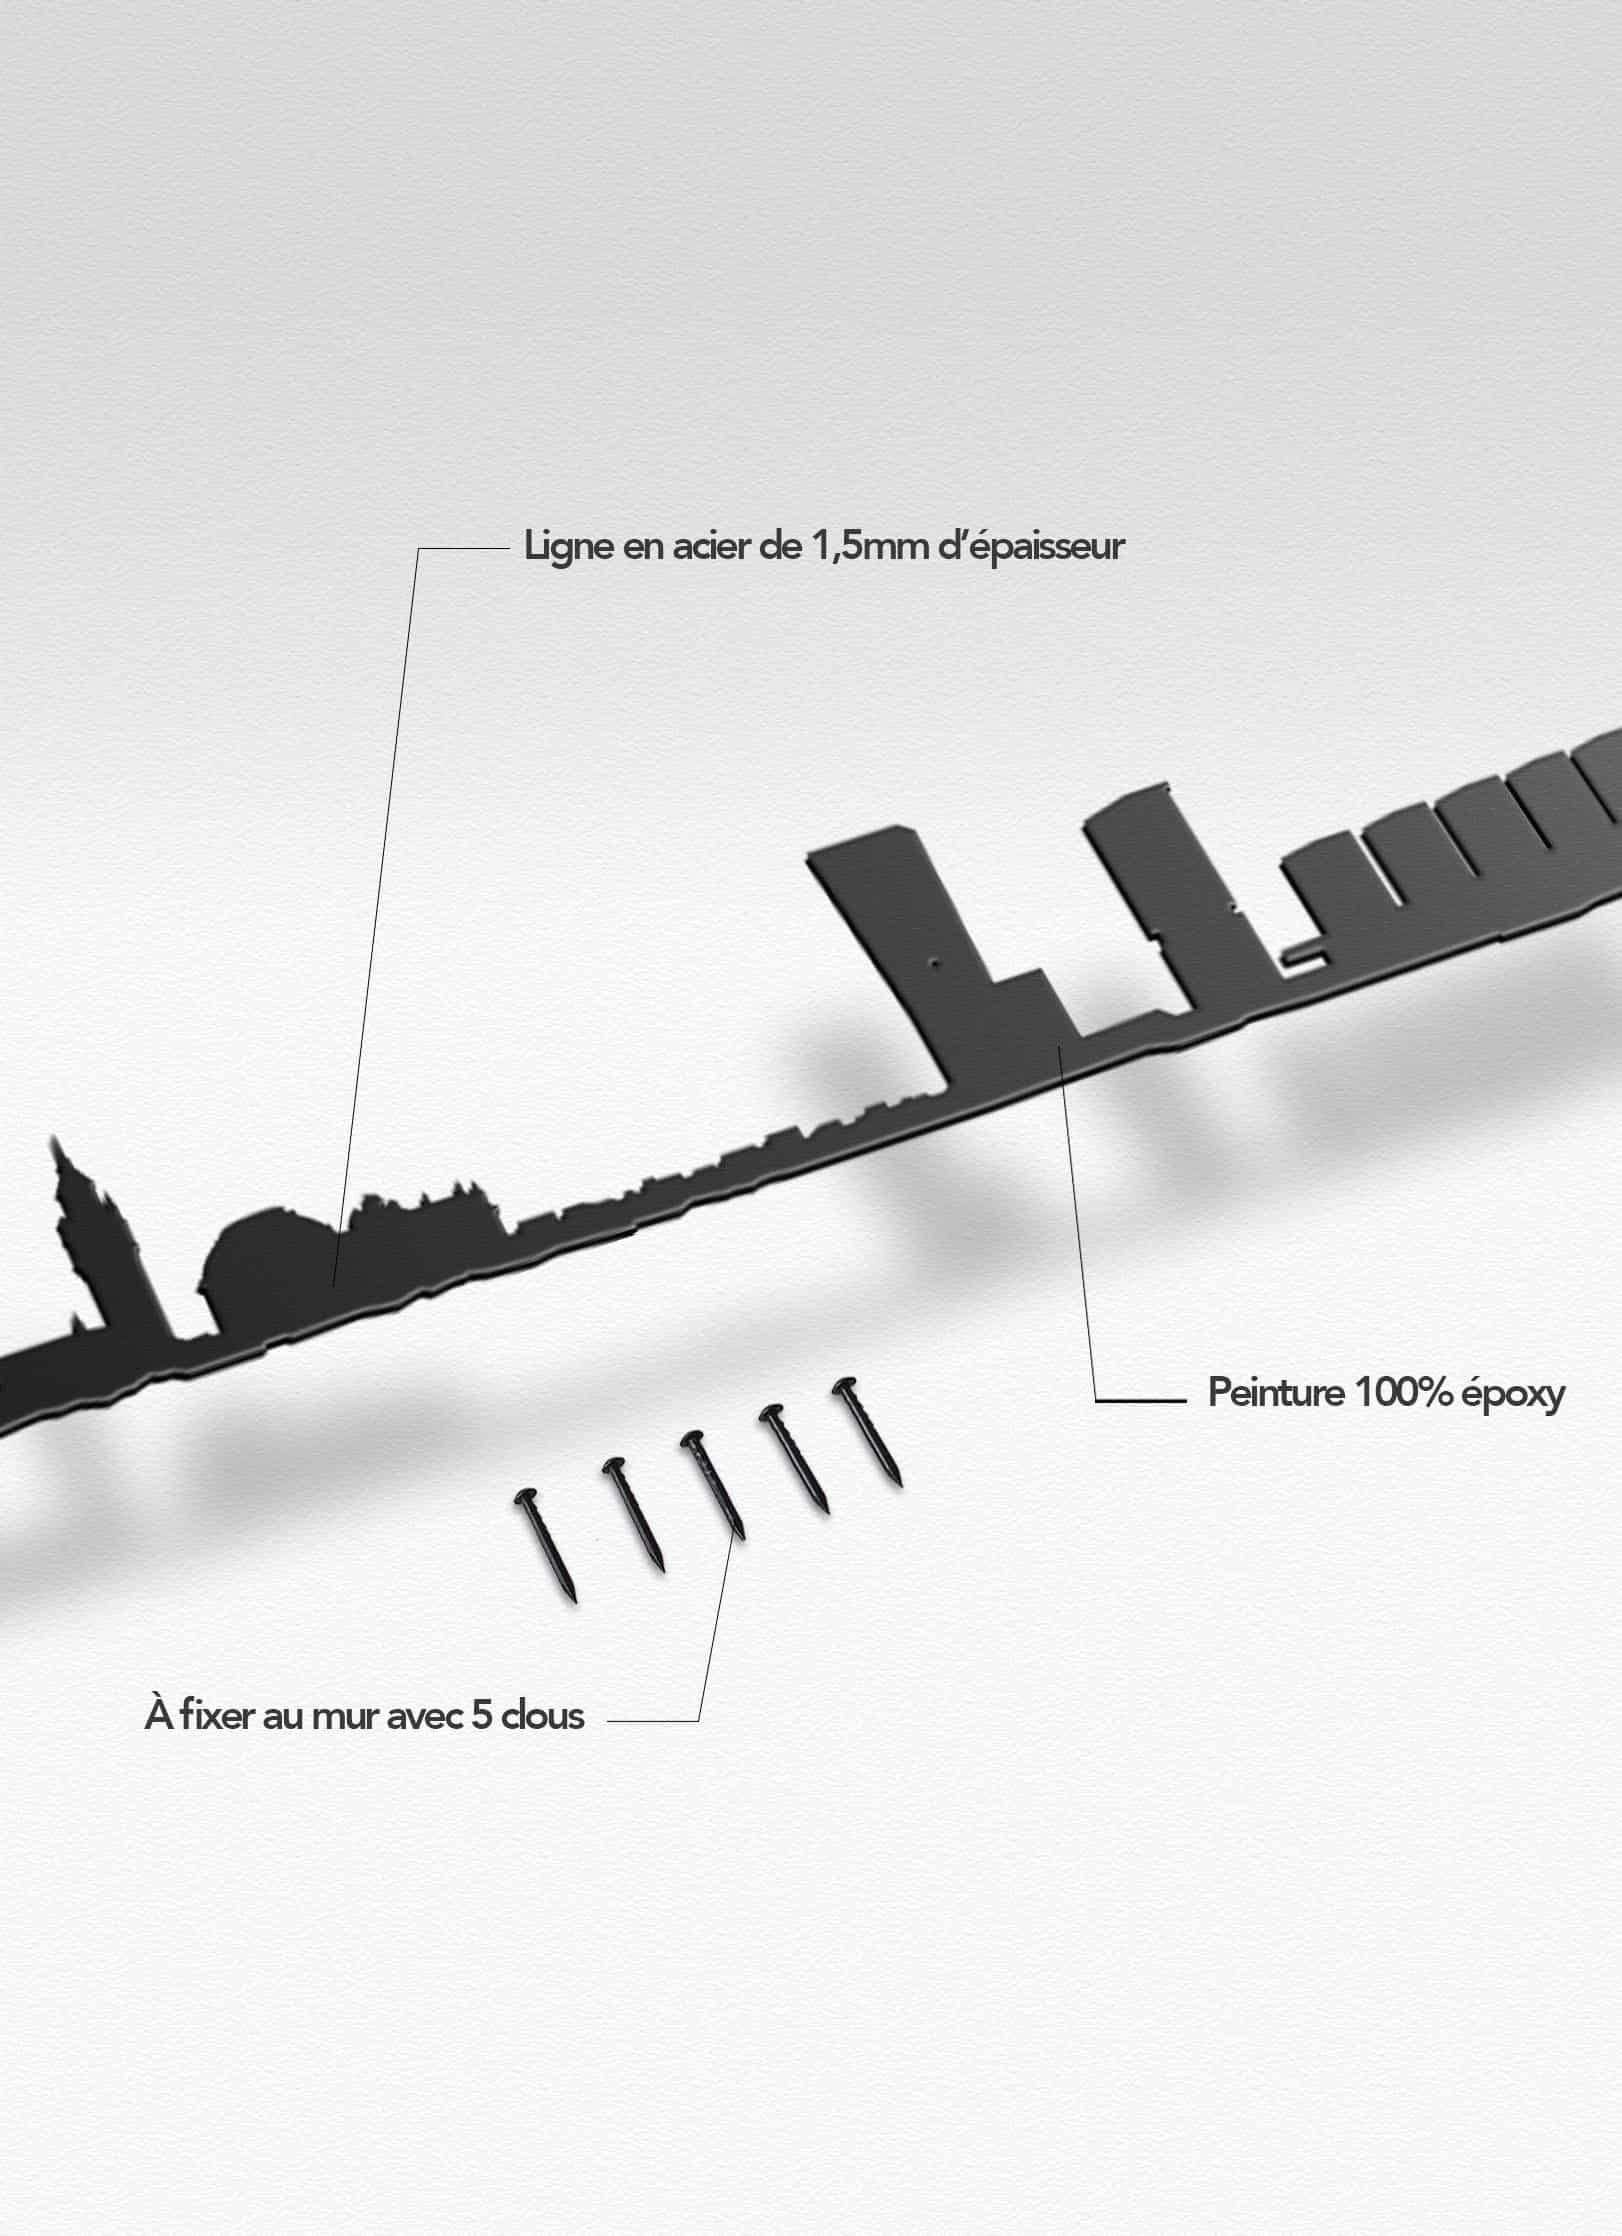 Presentation of the skyline of Lille XL